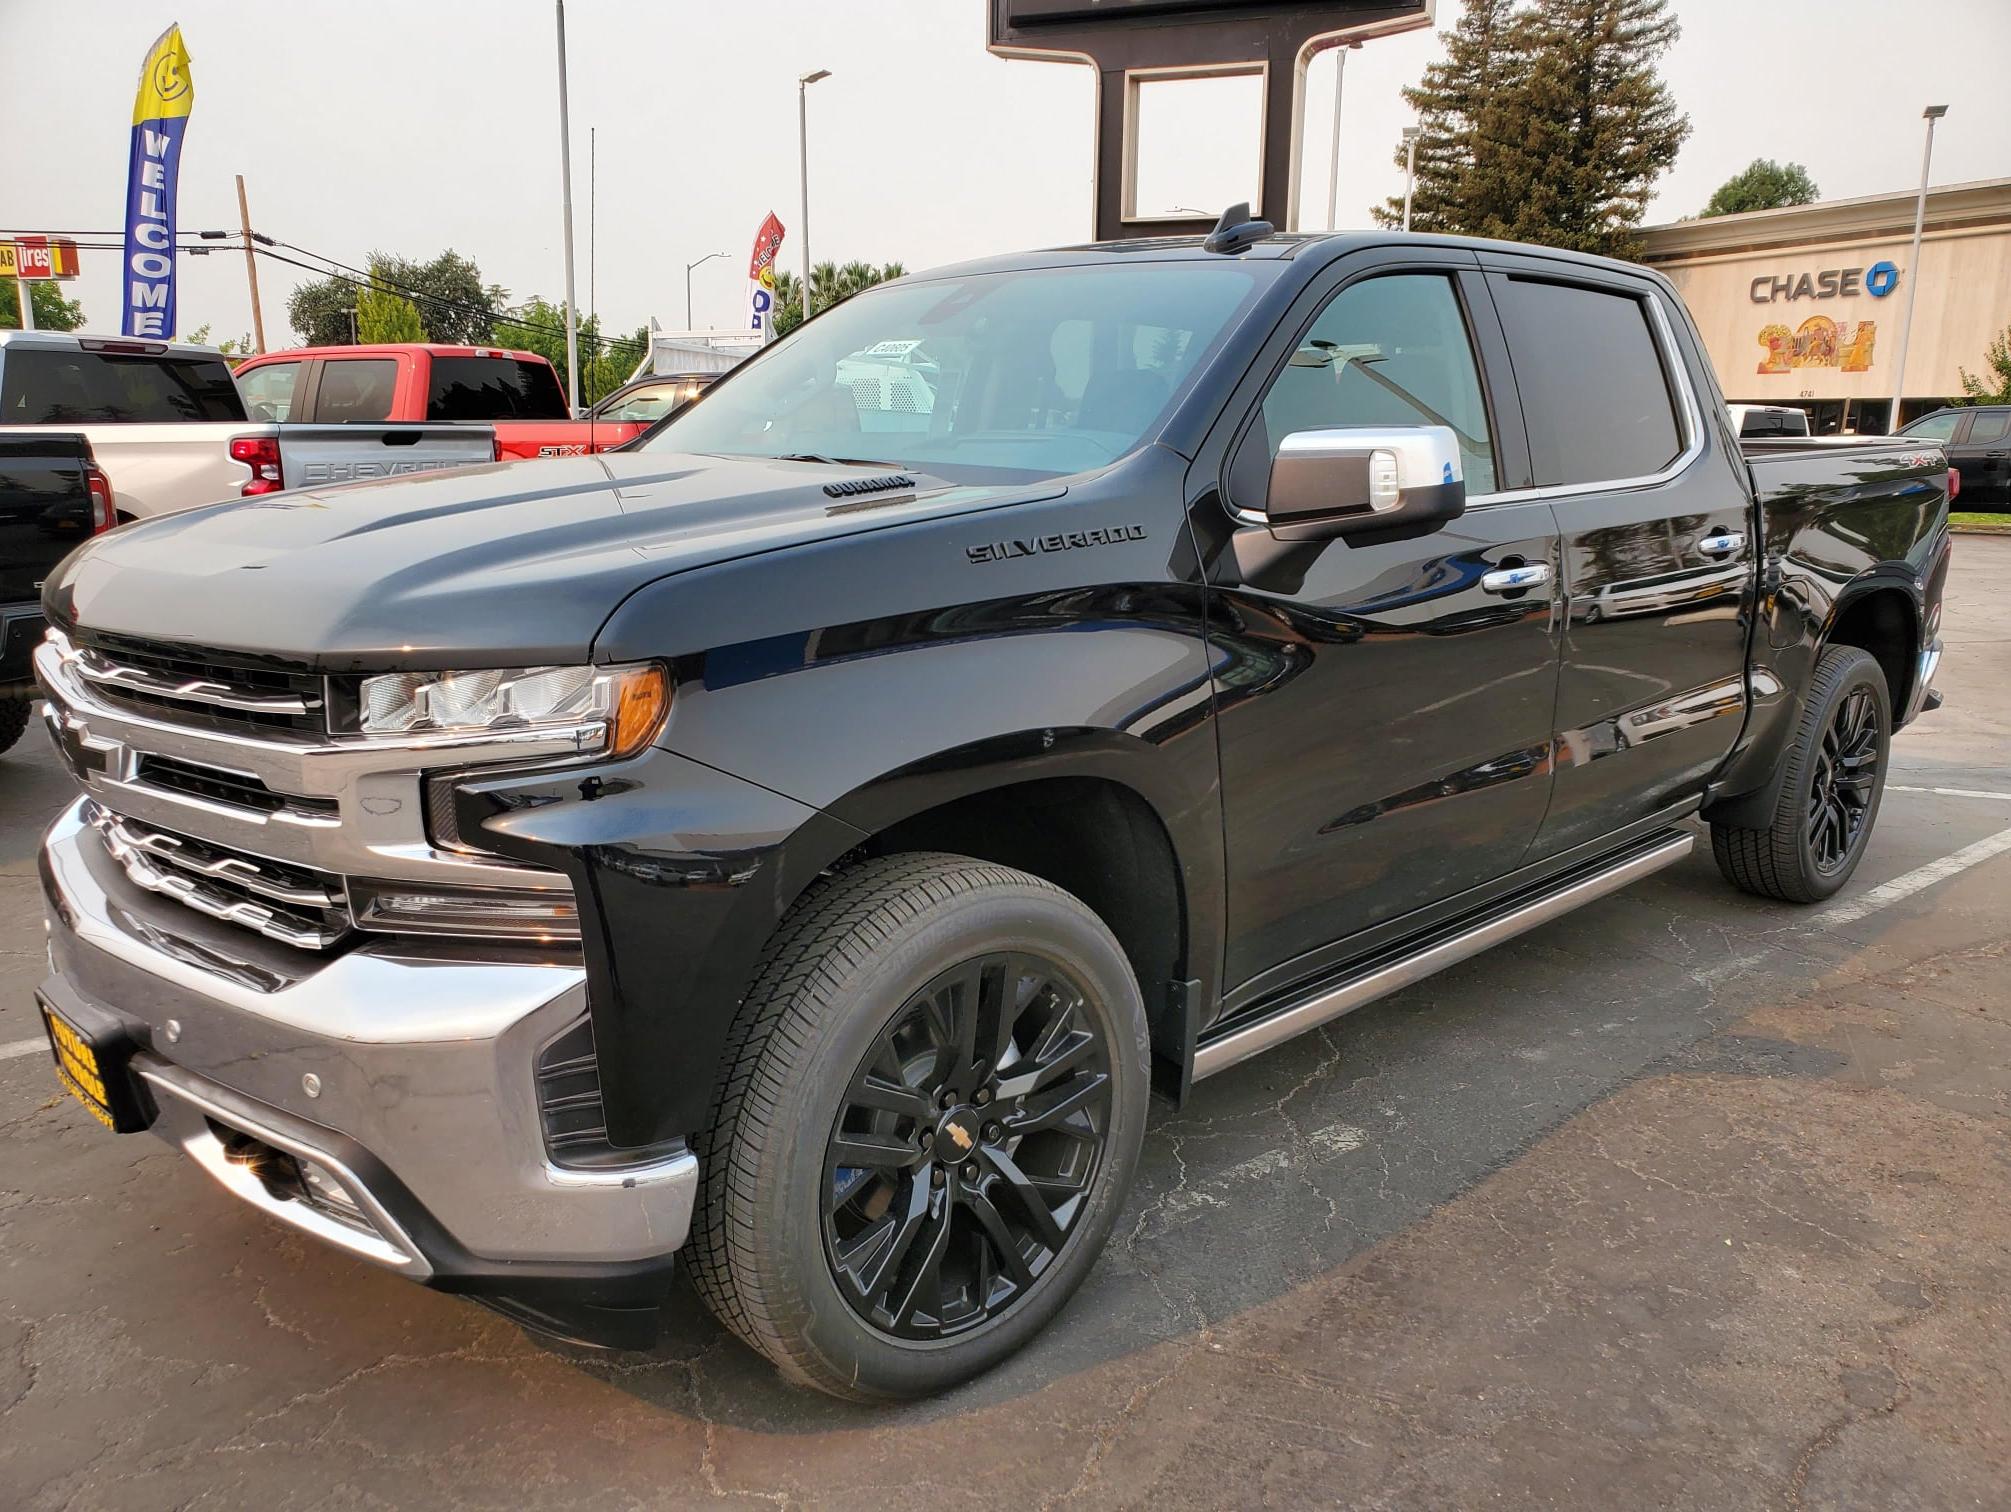 Front angled view of a black Chevy Silverado 1500 LTZ crew cab diesel truck with custom 22 inch wheels